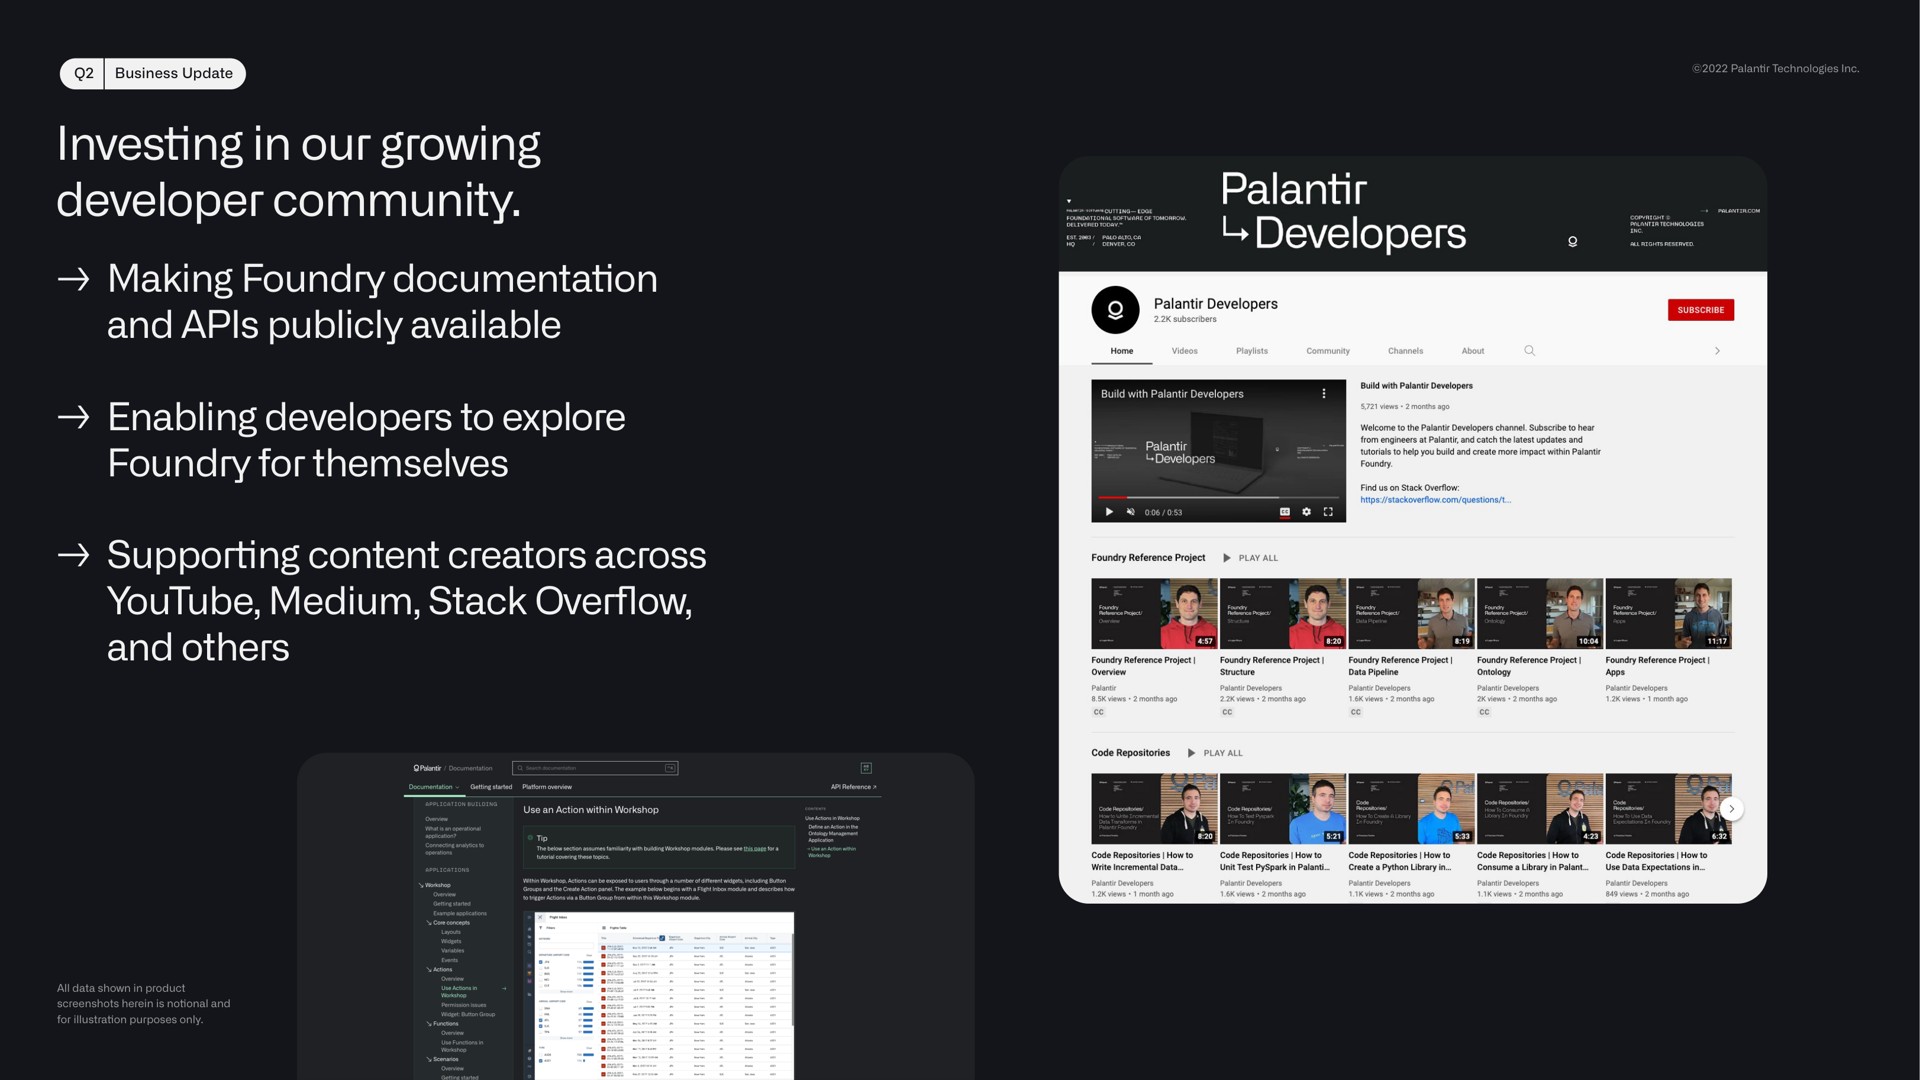 investing in our growing developer community making foundry documentation and publicly available enabling developers to explore foundry for themselves supporting content creators across medium stack over and overflow bevel foy retest secs | Palantir